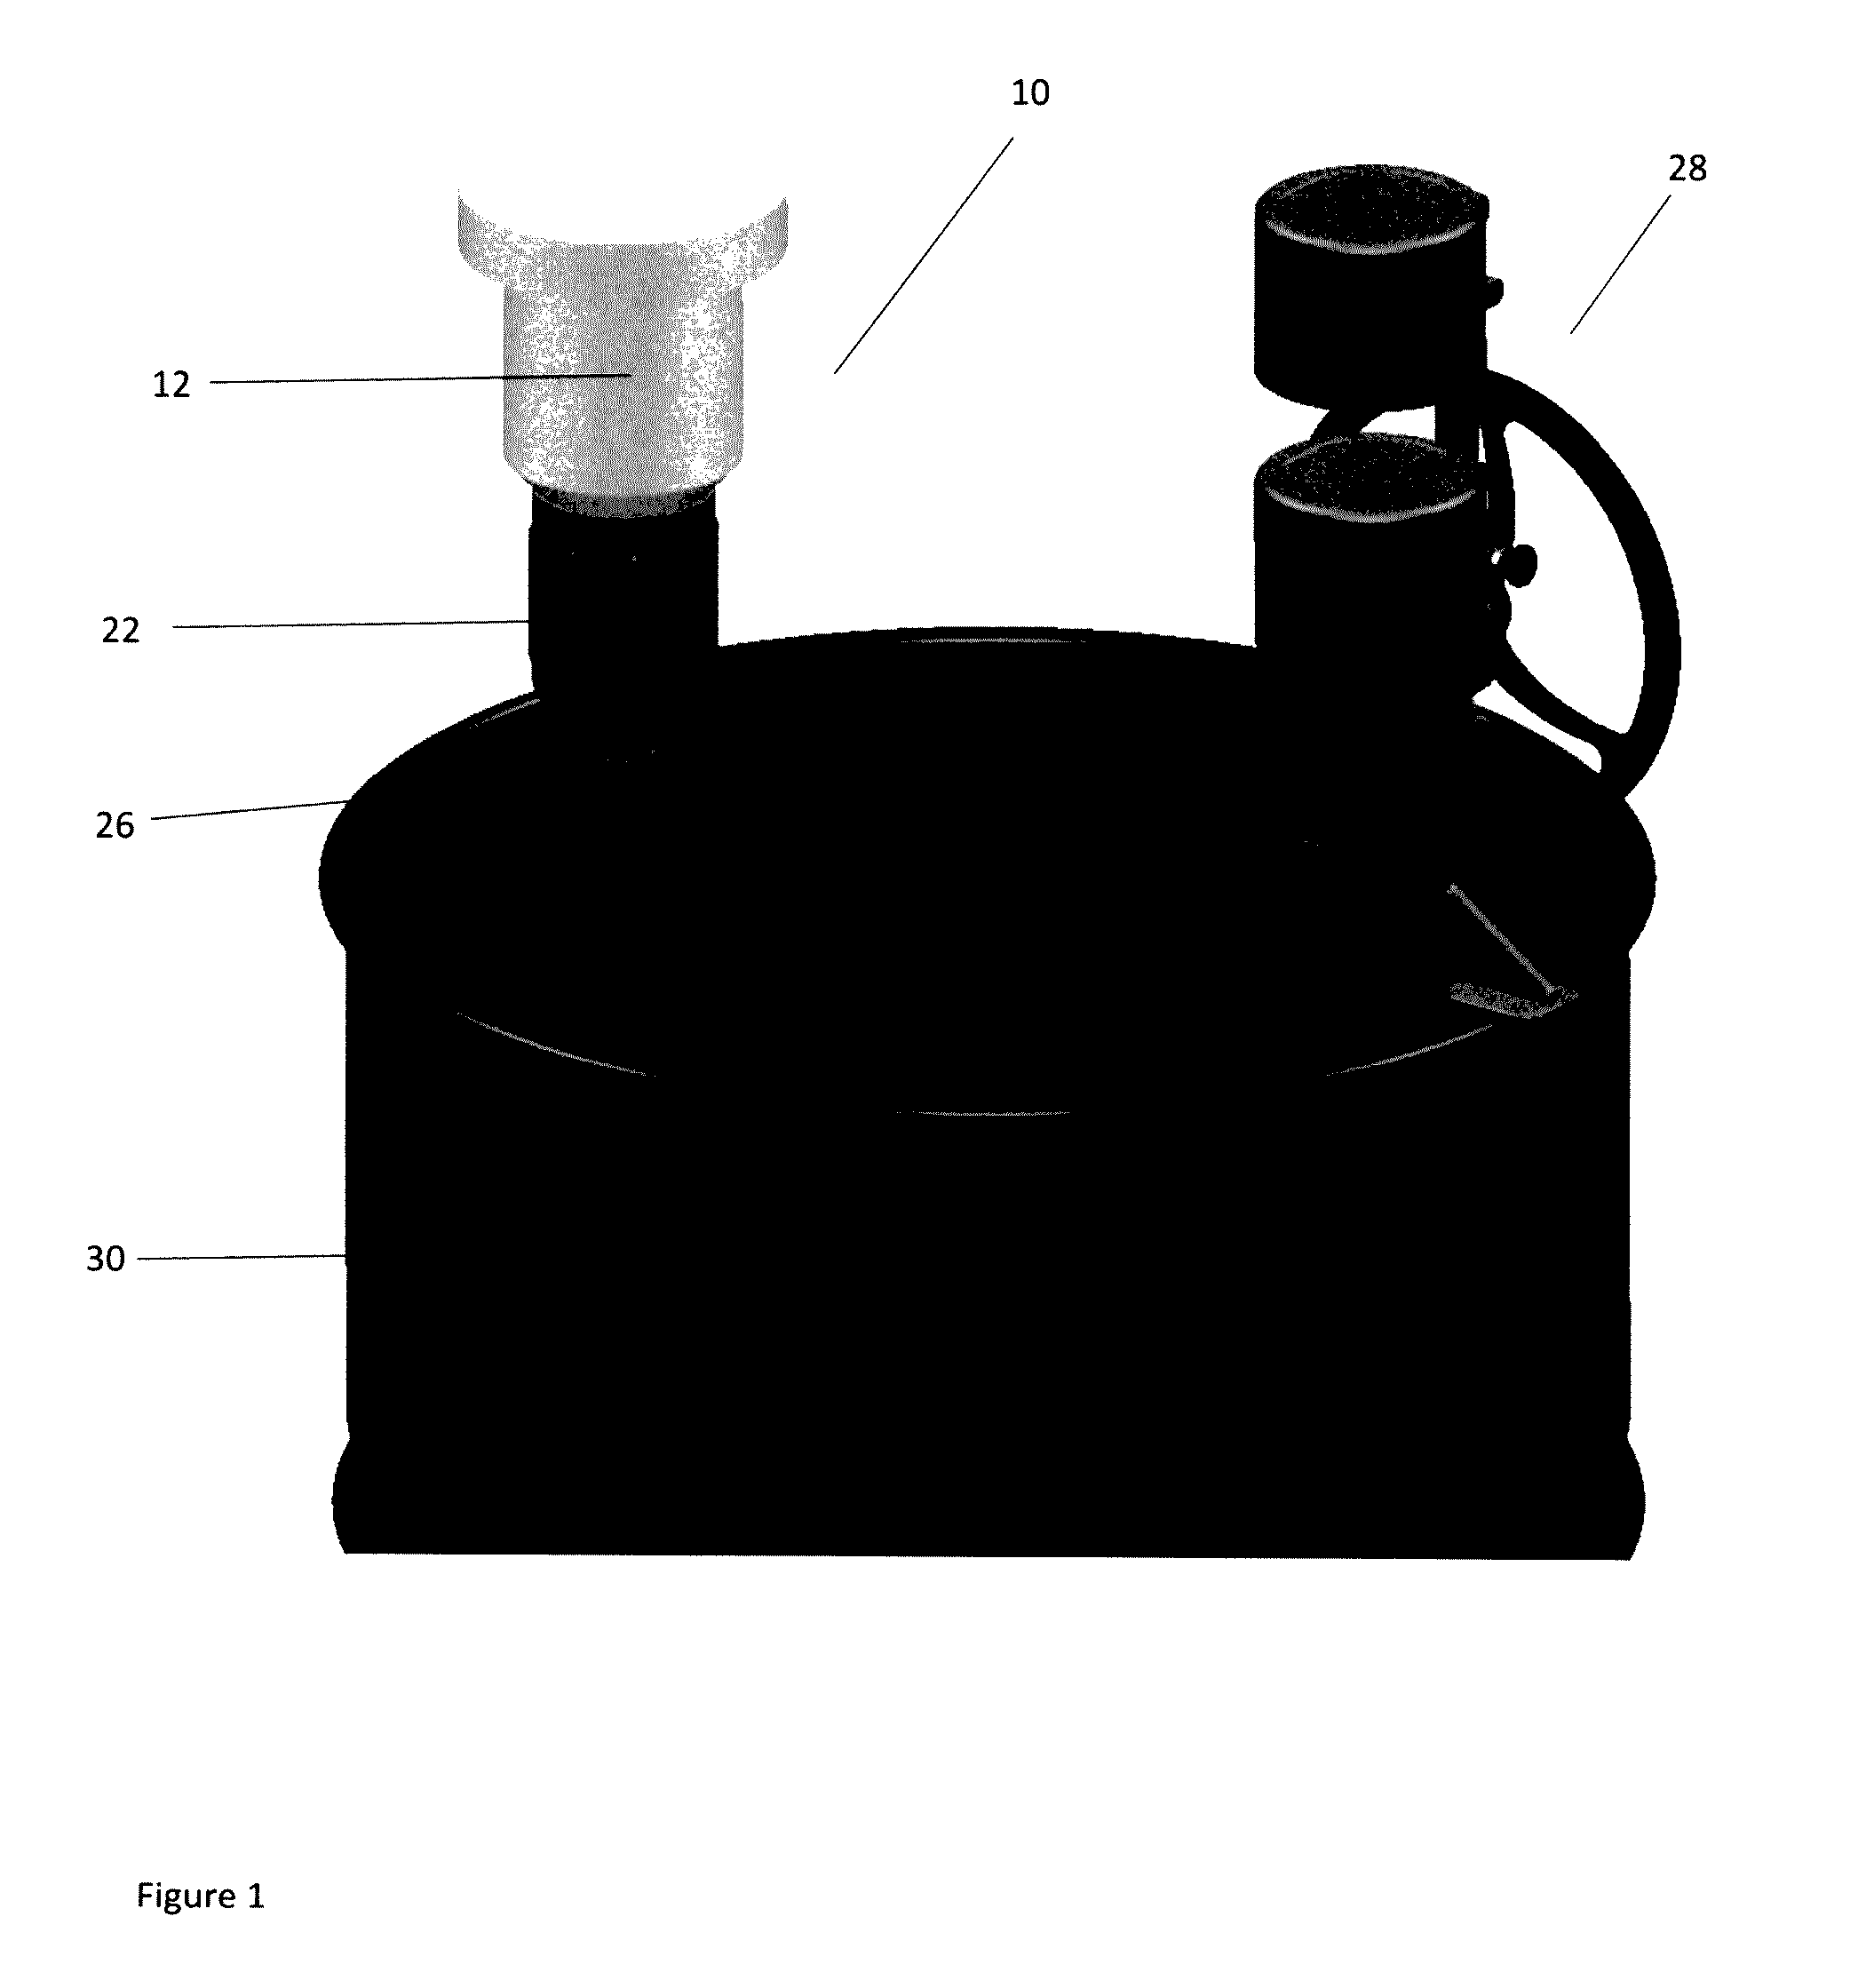 Filter for a propellant gas evacuation system